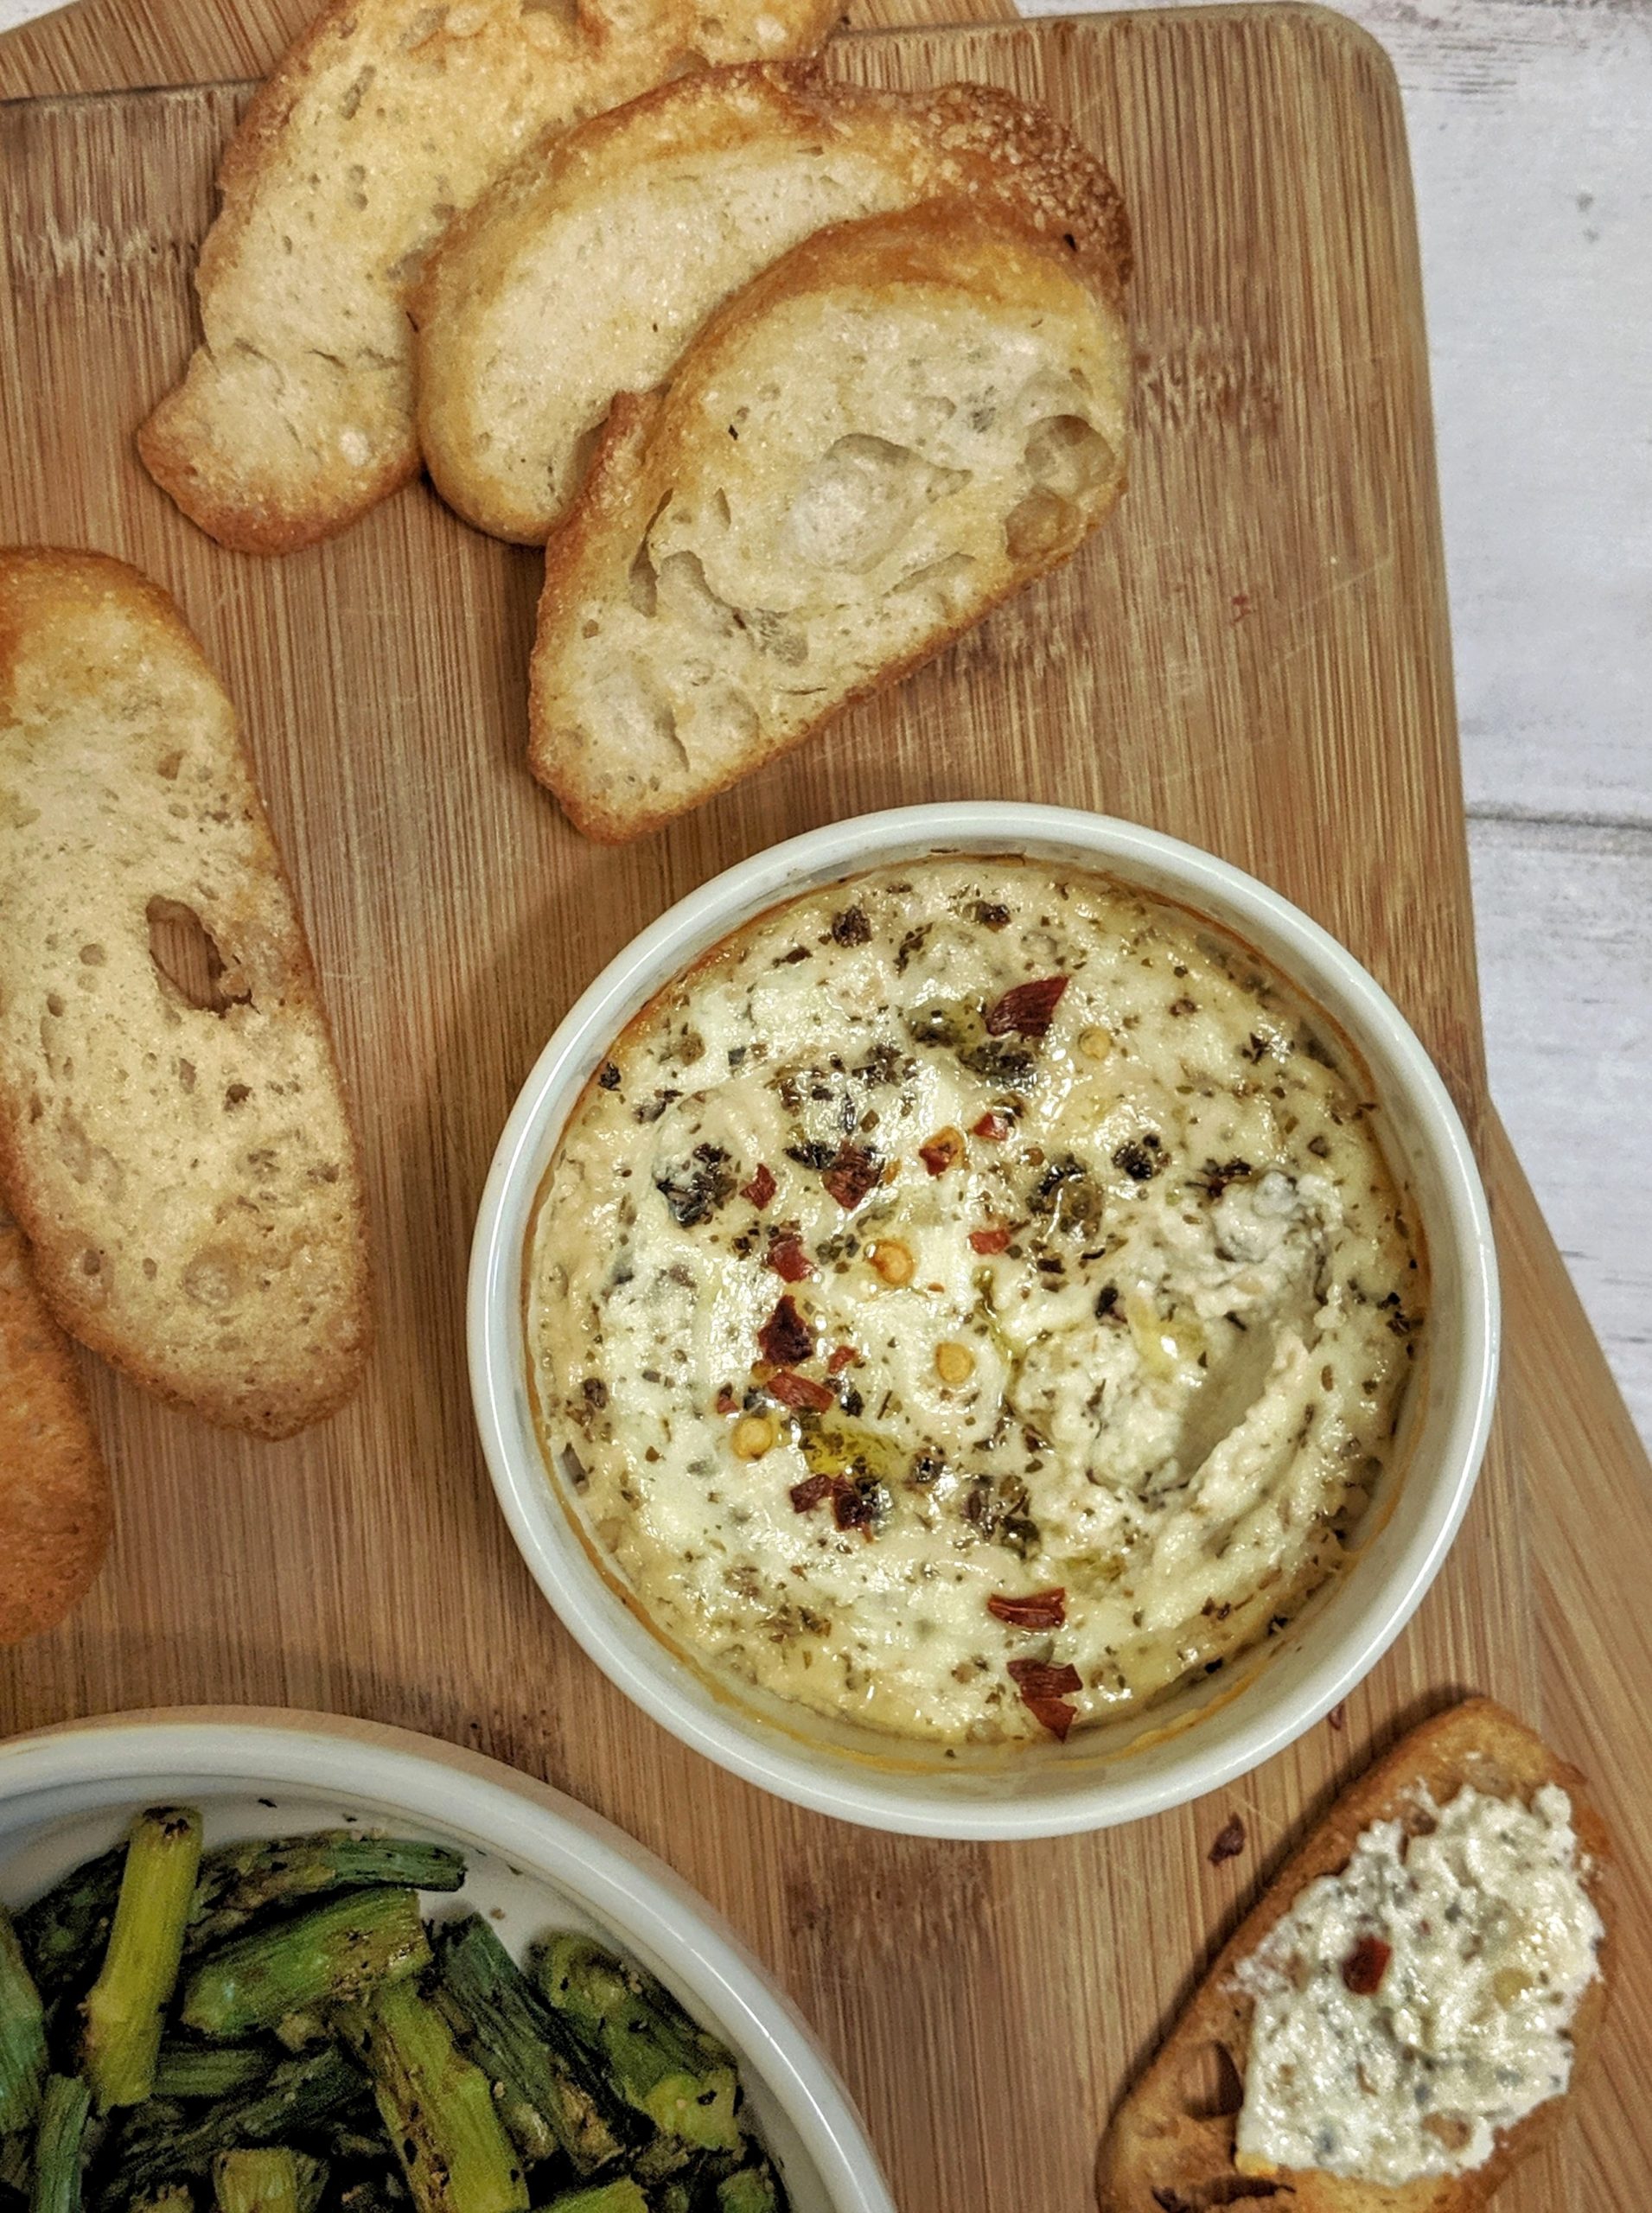 Baked Ricotta with Garlic & Herbs